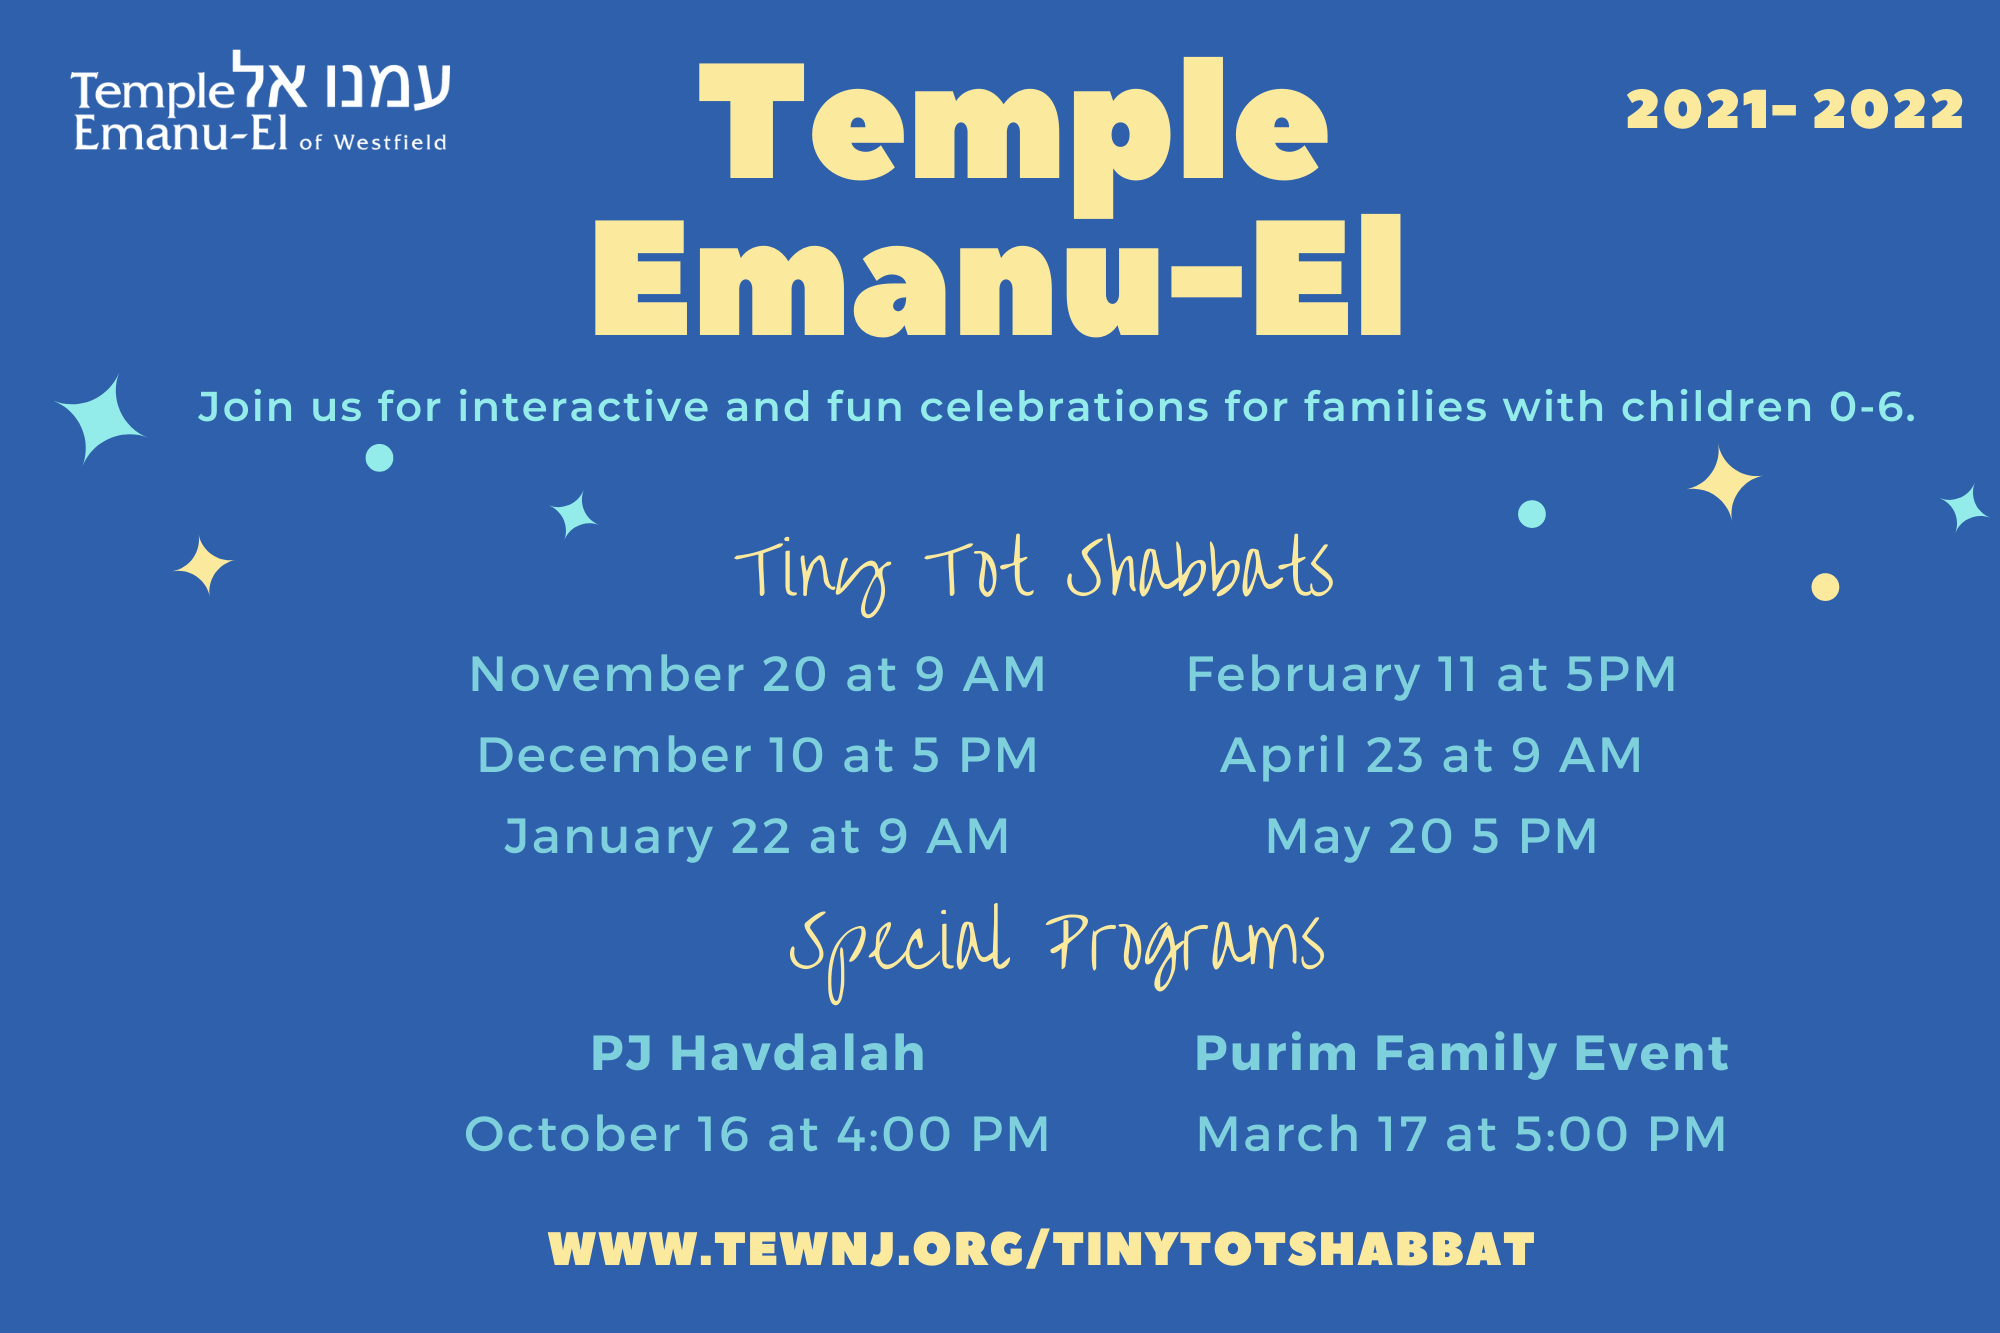 TINY TOT SHABBAT (may want to specify Fridays vs Saturdays….) November 20th 9am December 10th 5pm January 22nd 9am February 11th 5pm April 23rd 9am May 20th 5pm (1)